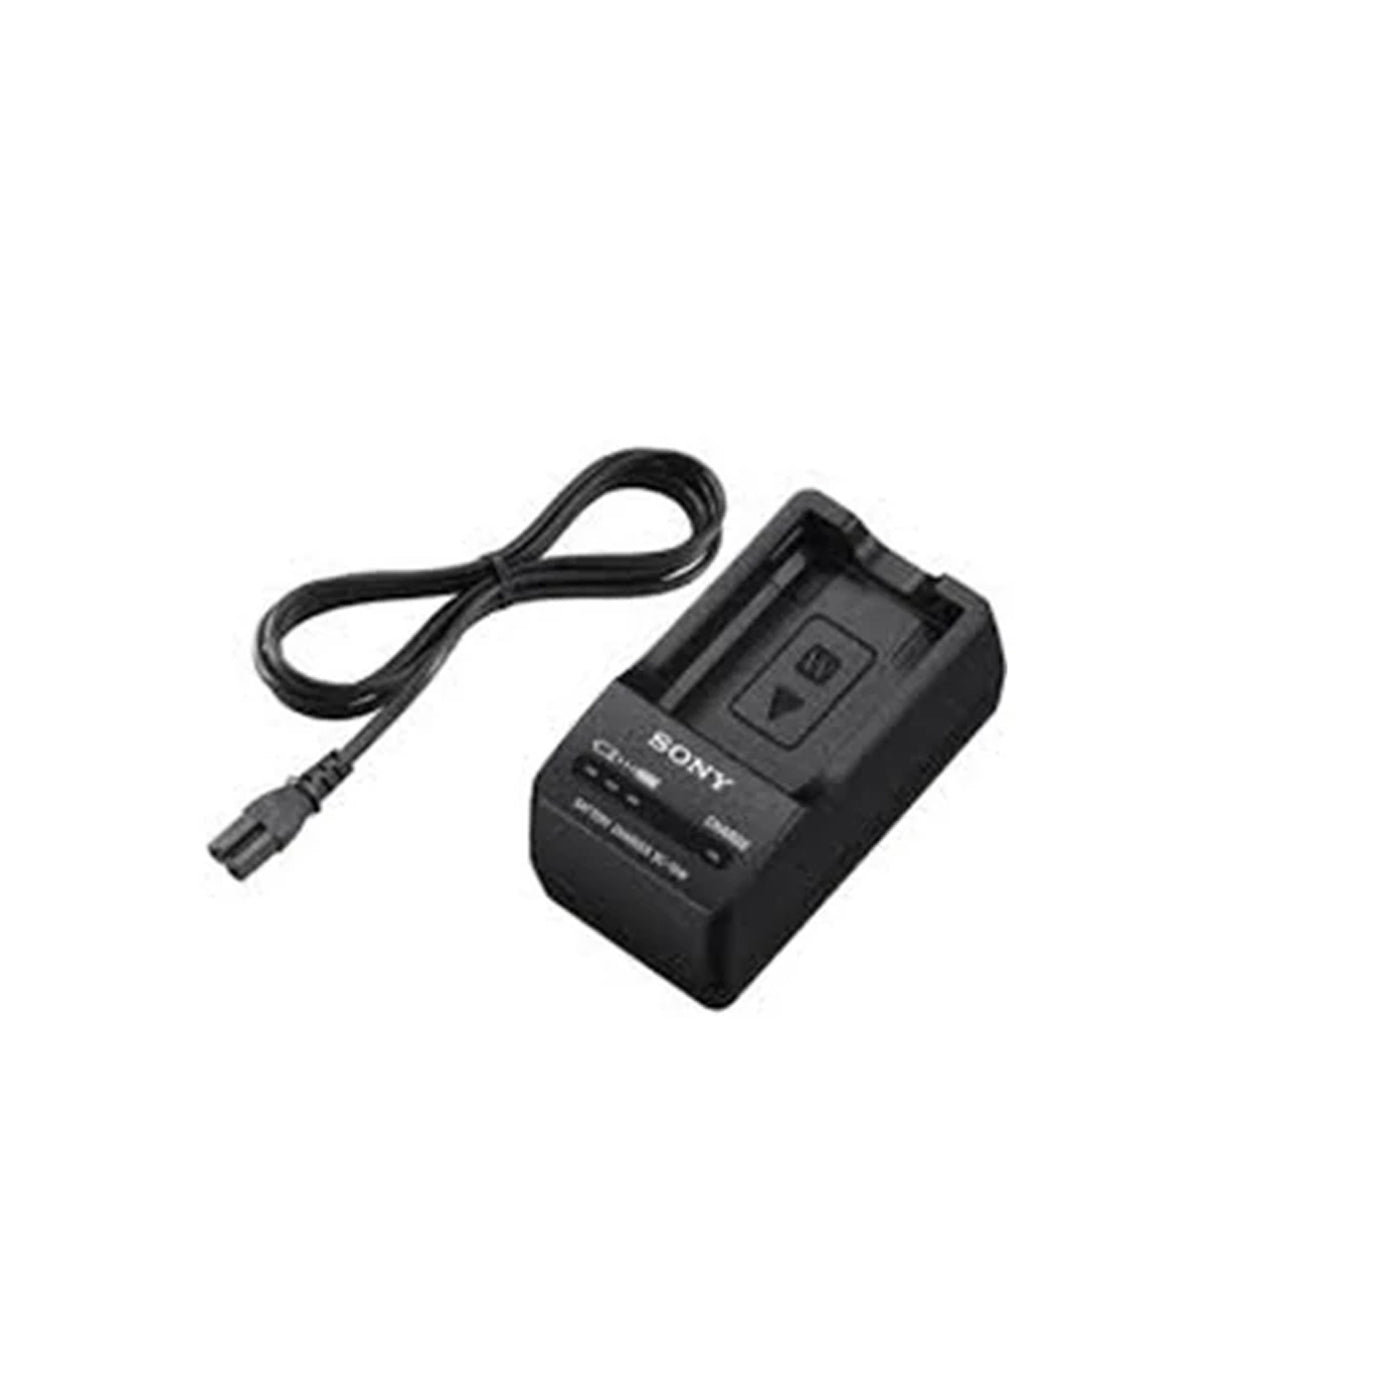 BC-TRW Battery Charger with Power Level Indicator